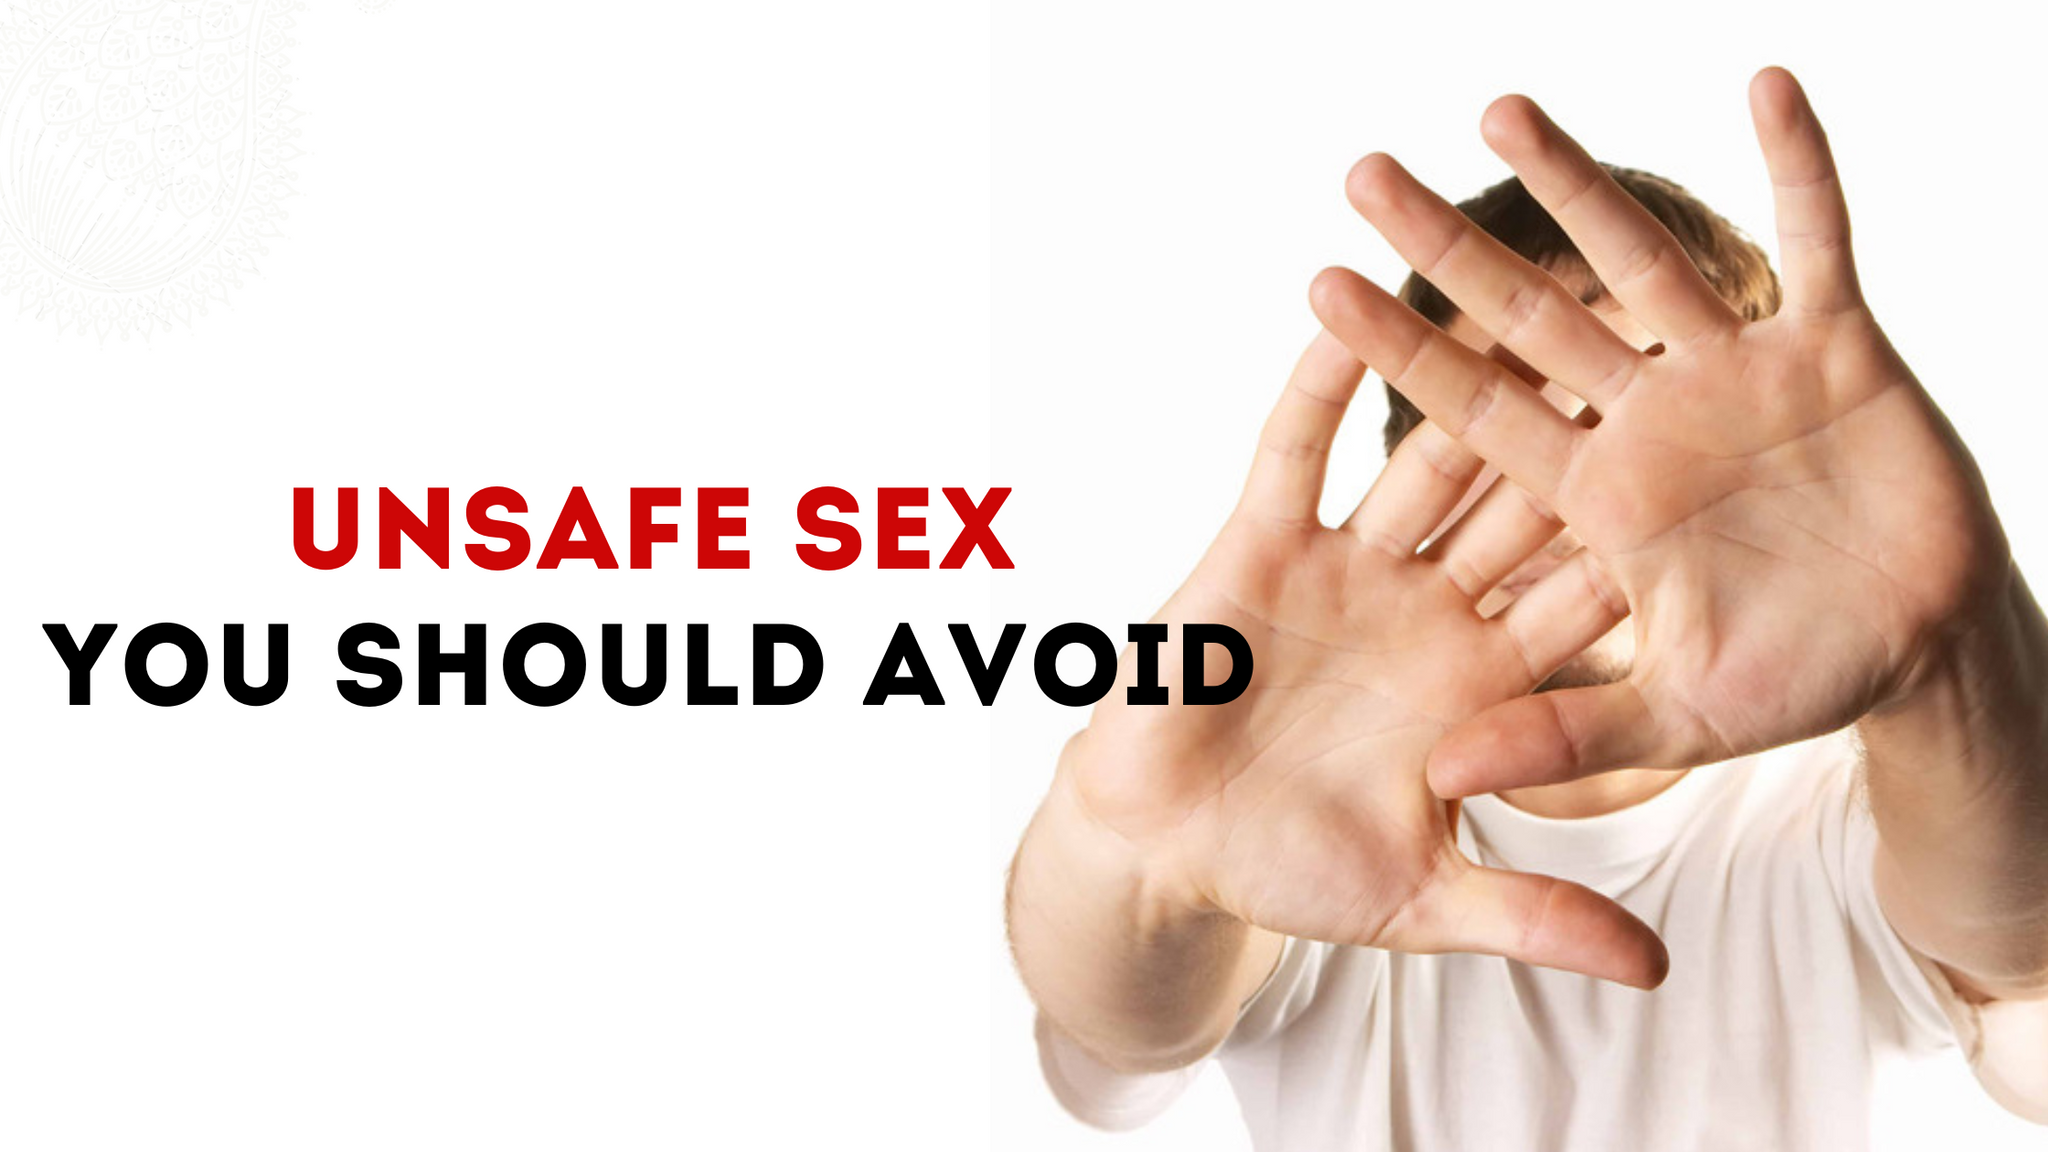 UNSAFE SEX: YOU SHOULD AVOID